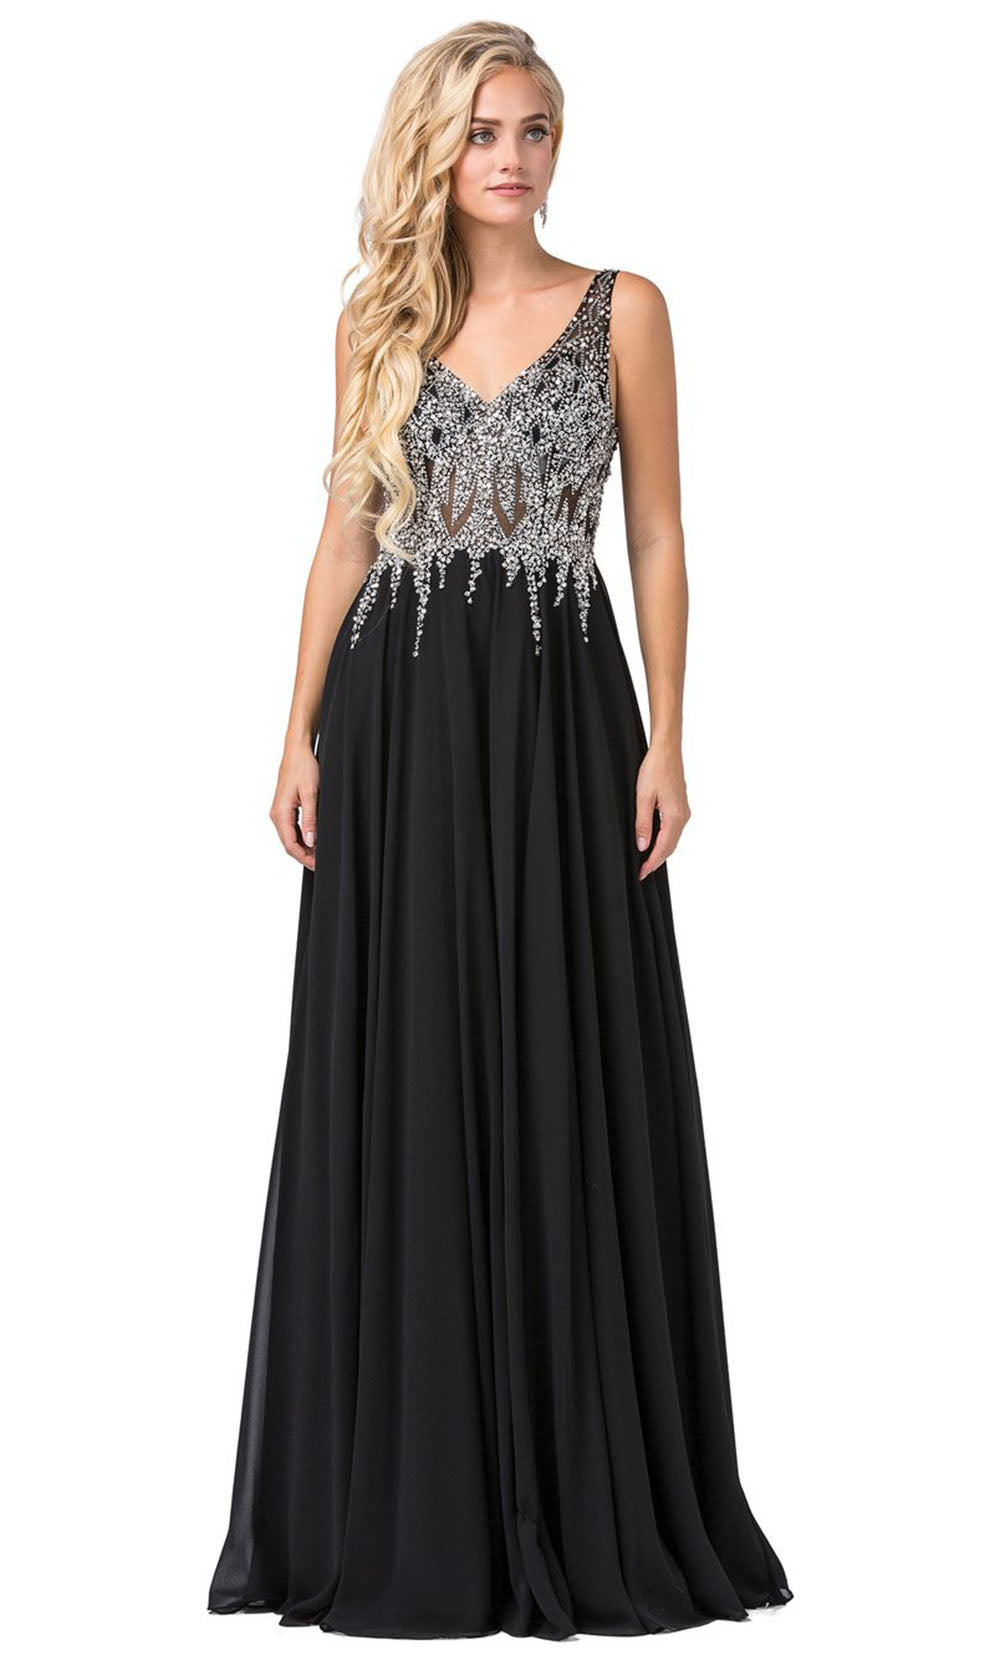 Dancing Queen - 2570 Embellished Sheer Bodice A-Line Gown In Black